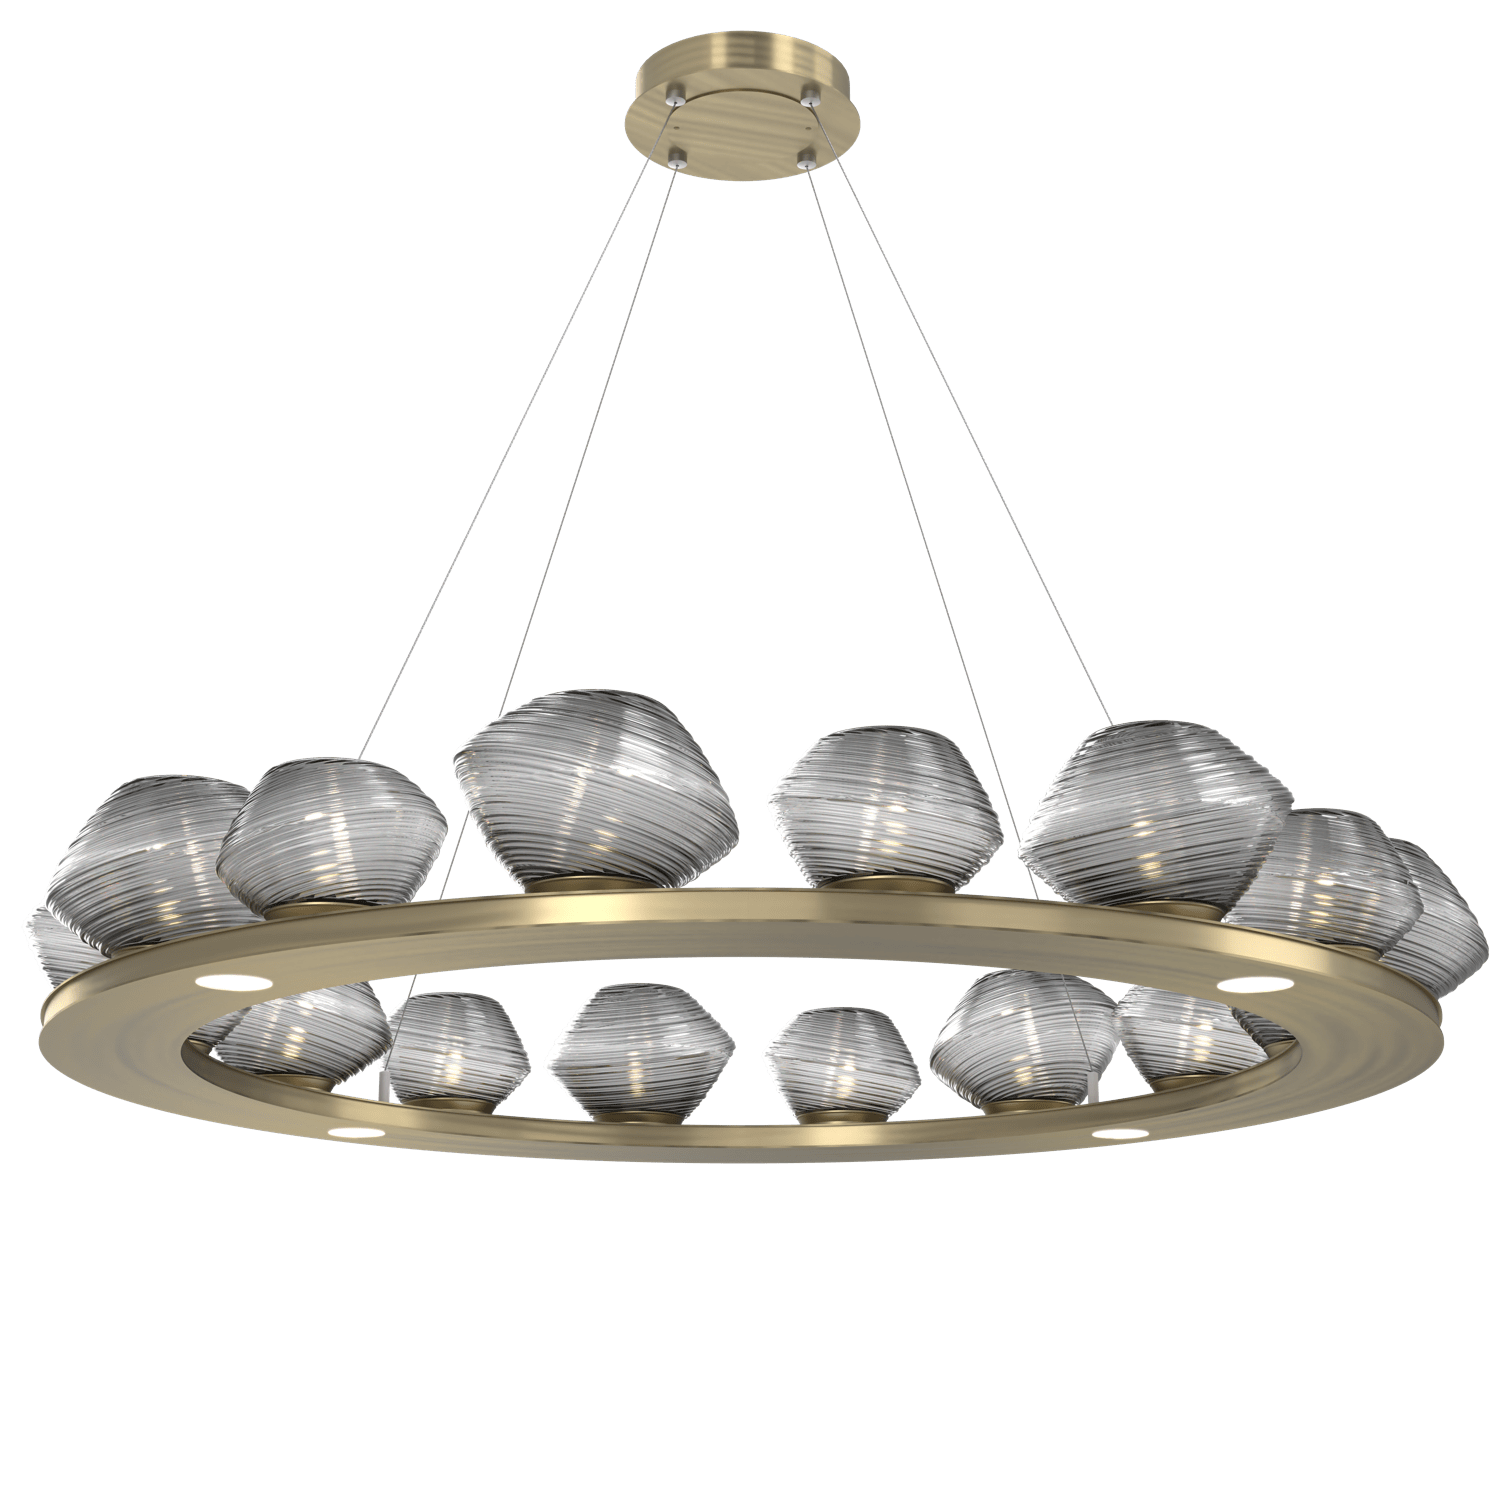 CHB0089-0D-HB-S-Hammerton-Studio-Mesa-48-inch-ring-chandelier-with-heritage-brass-finish-and-smoke-blown-glass-shades-and-LED-lamping